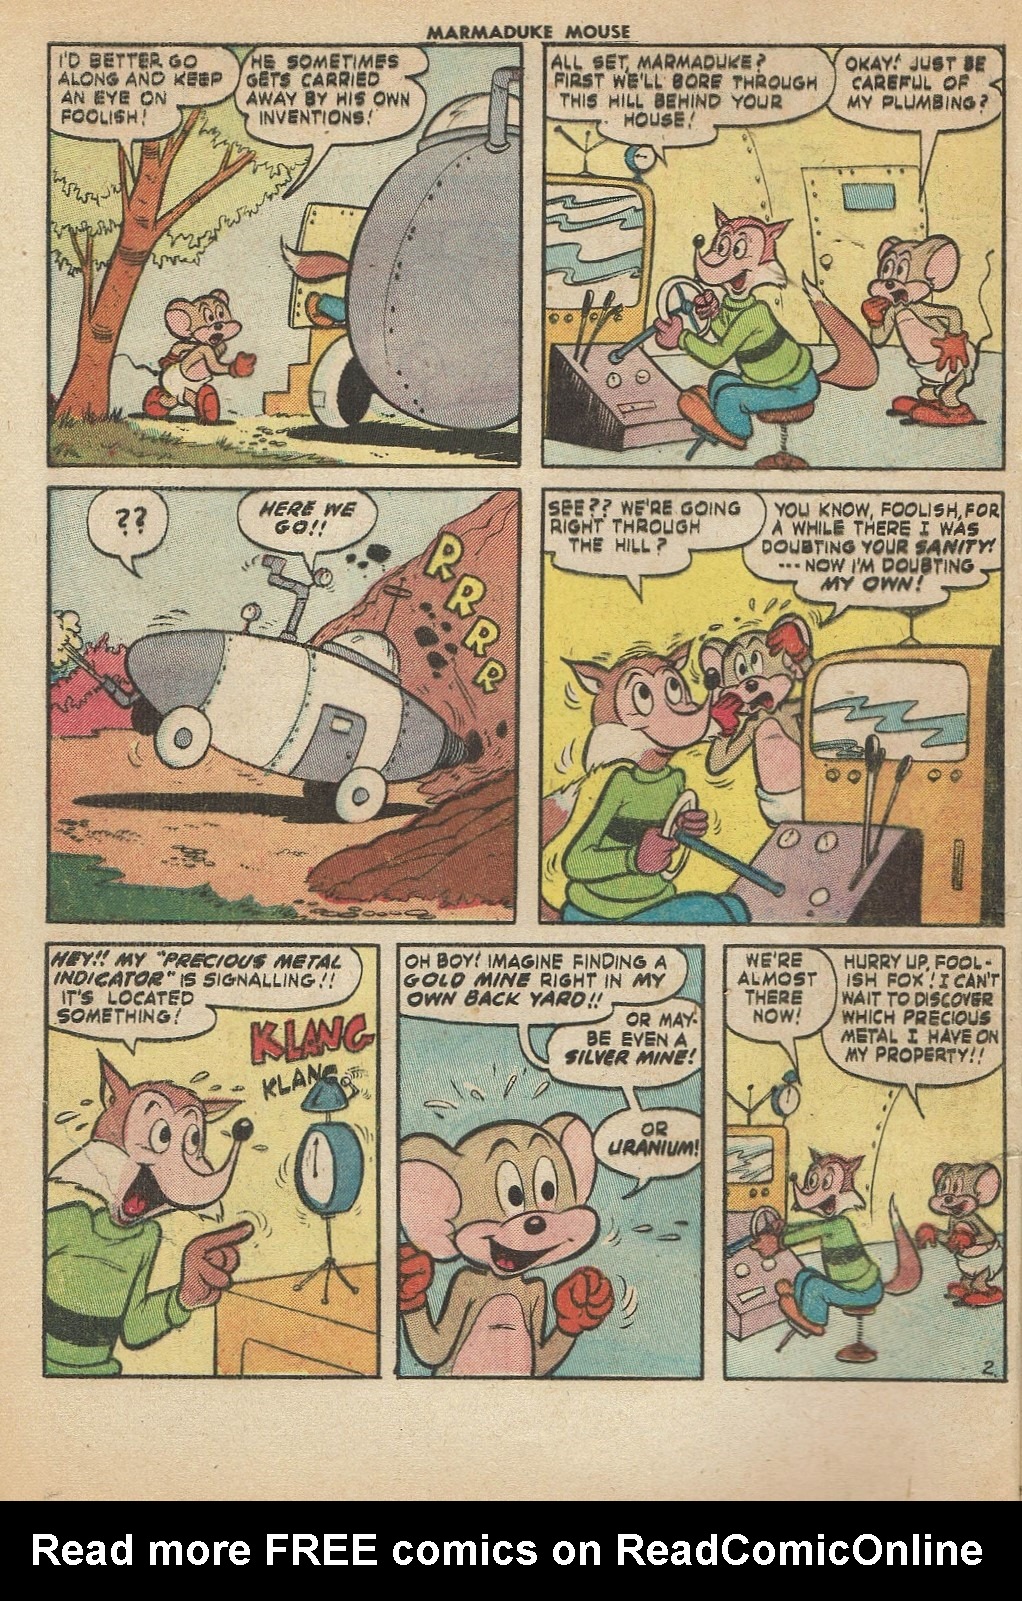 Read online Marmaduke Mouse comic -  Issue #47 - 4